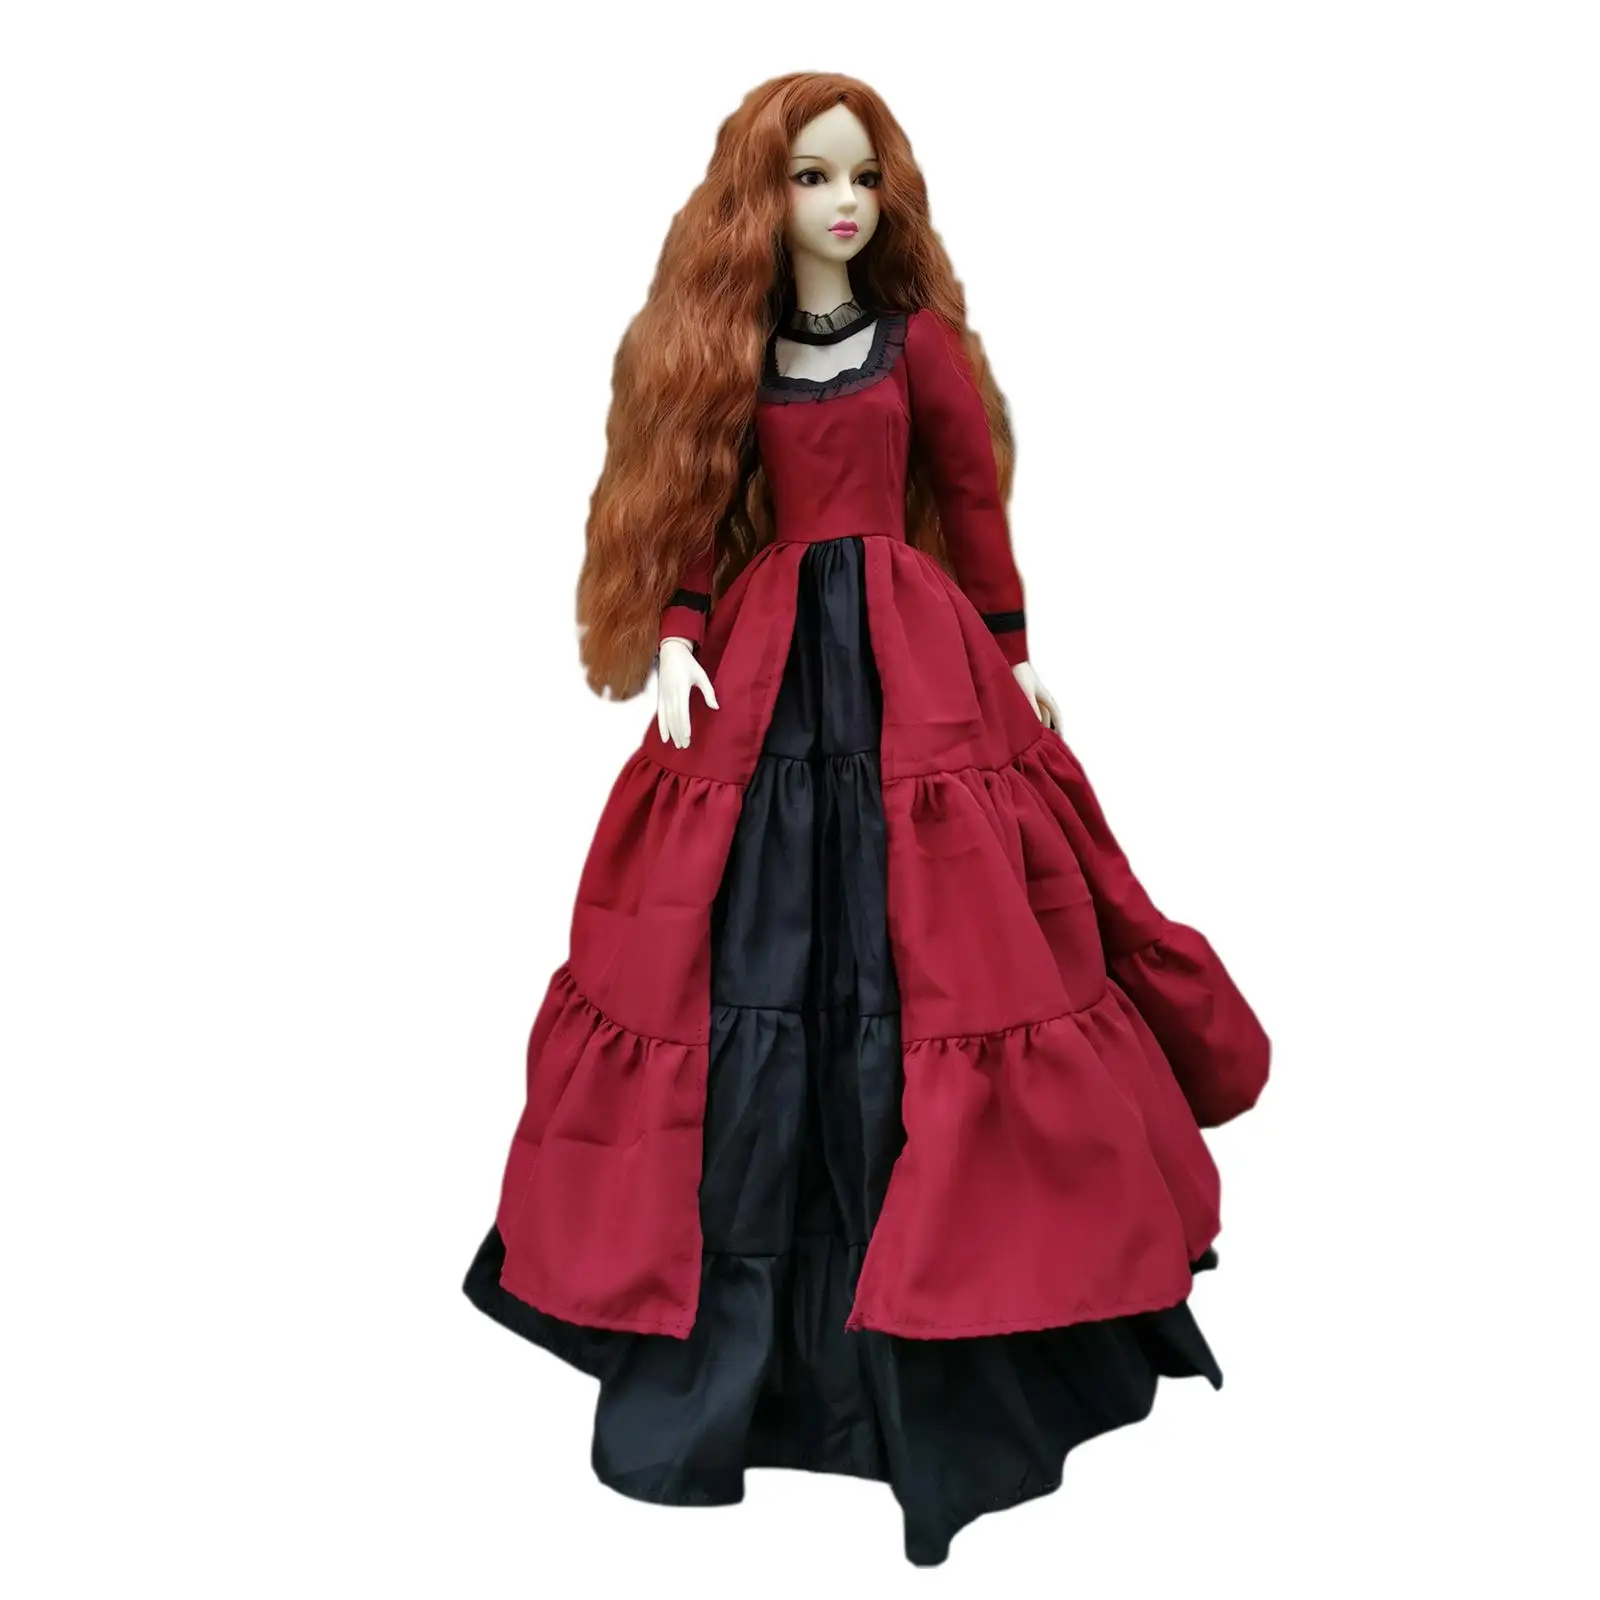 Ball Jointed Doll 1/3 Dolls with Red Dress Rotatable Joints Easy to Pose Princess Doll Action Figures 60 cm Doll for Children